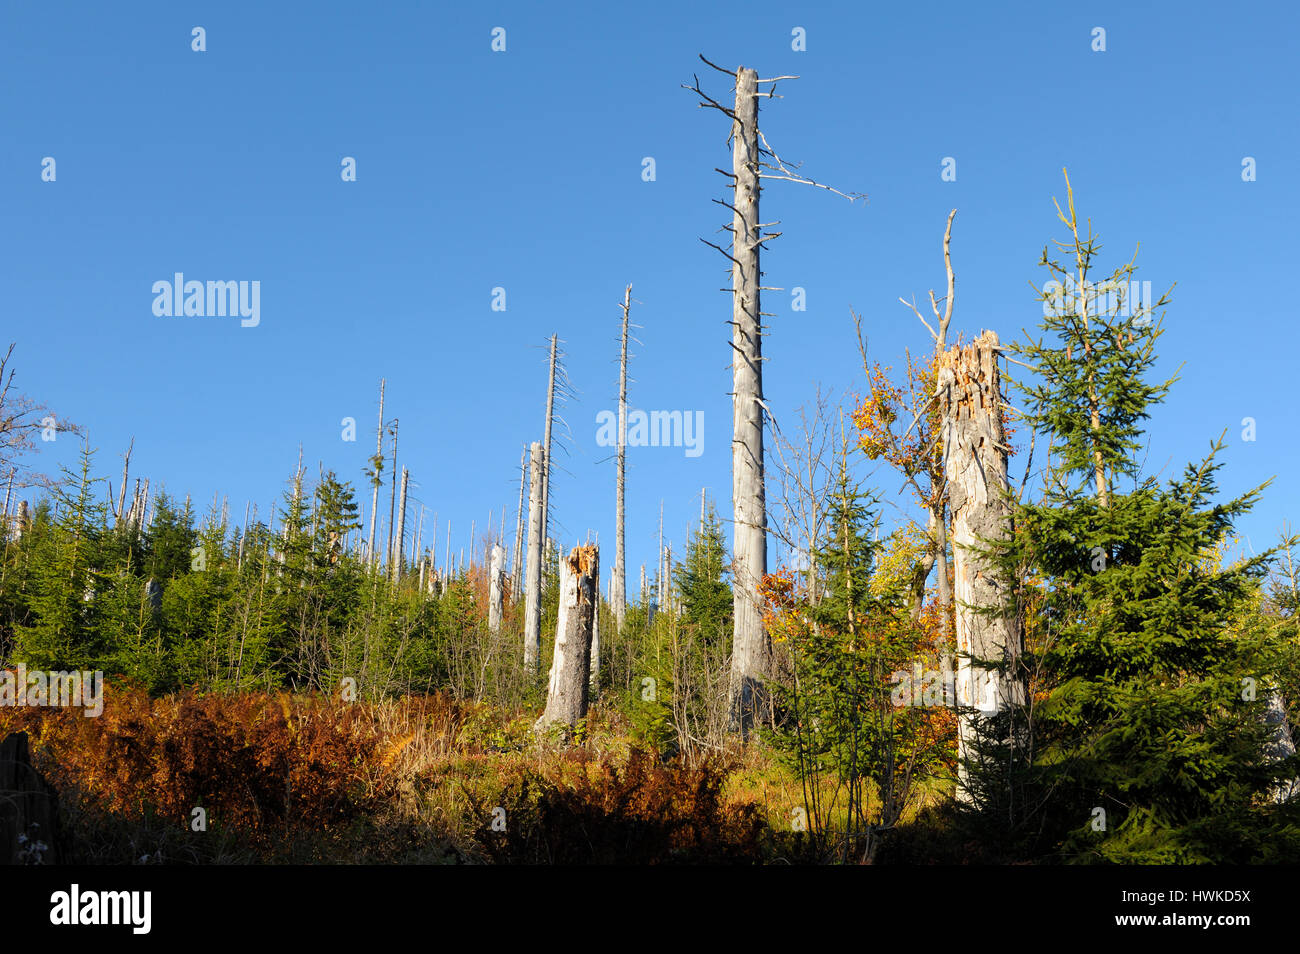 Dead forest, october, Lusen, Bavarian Forest National Park, Germany Stock Photo